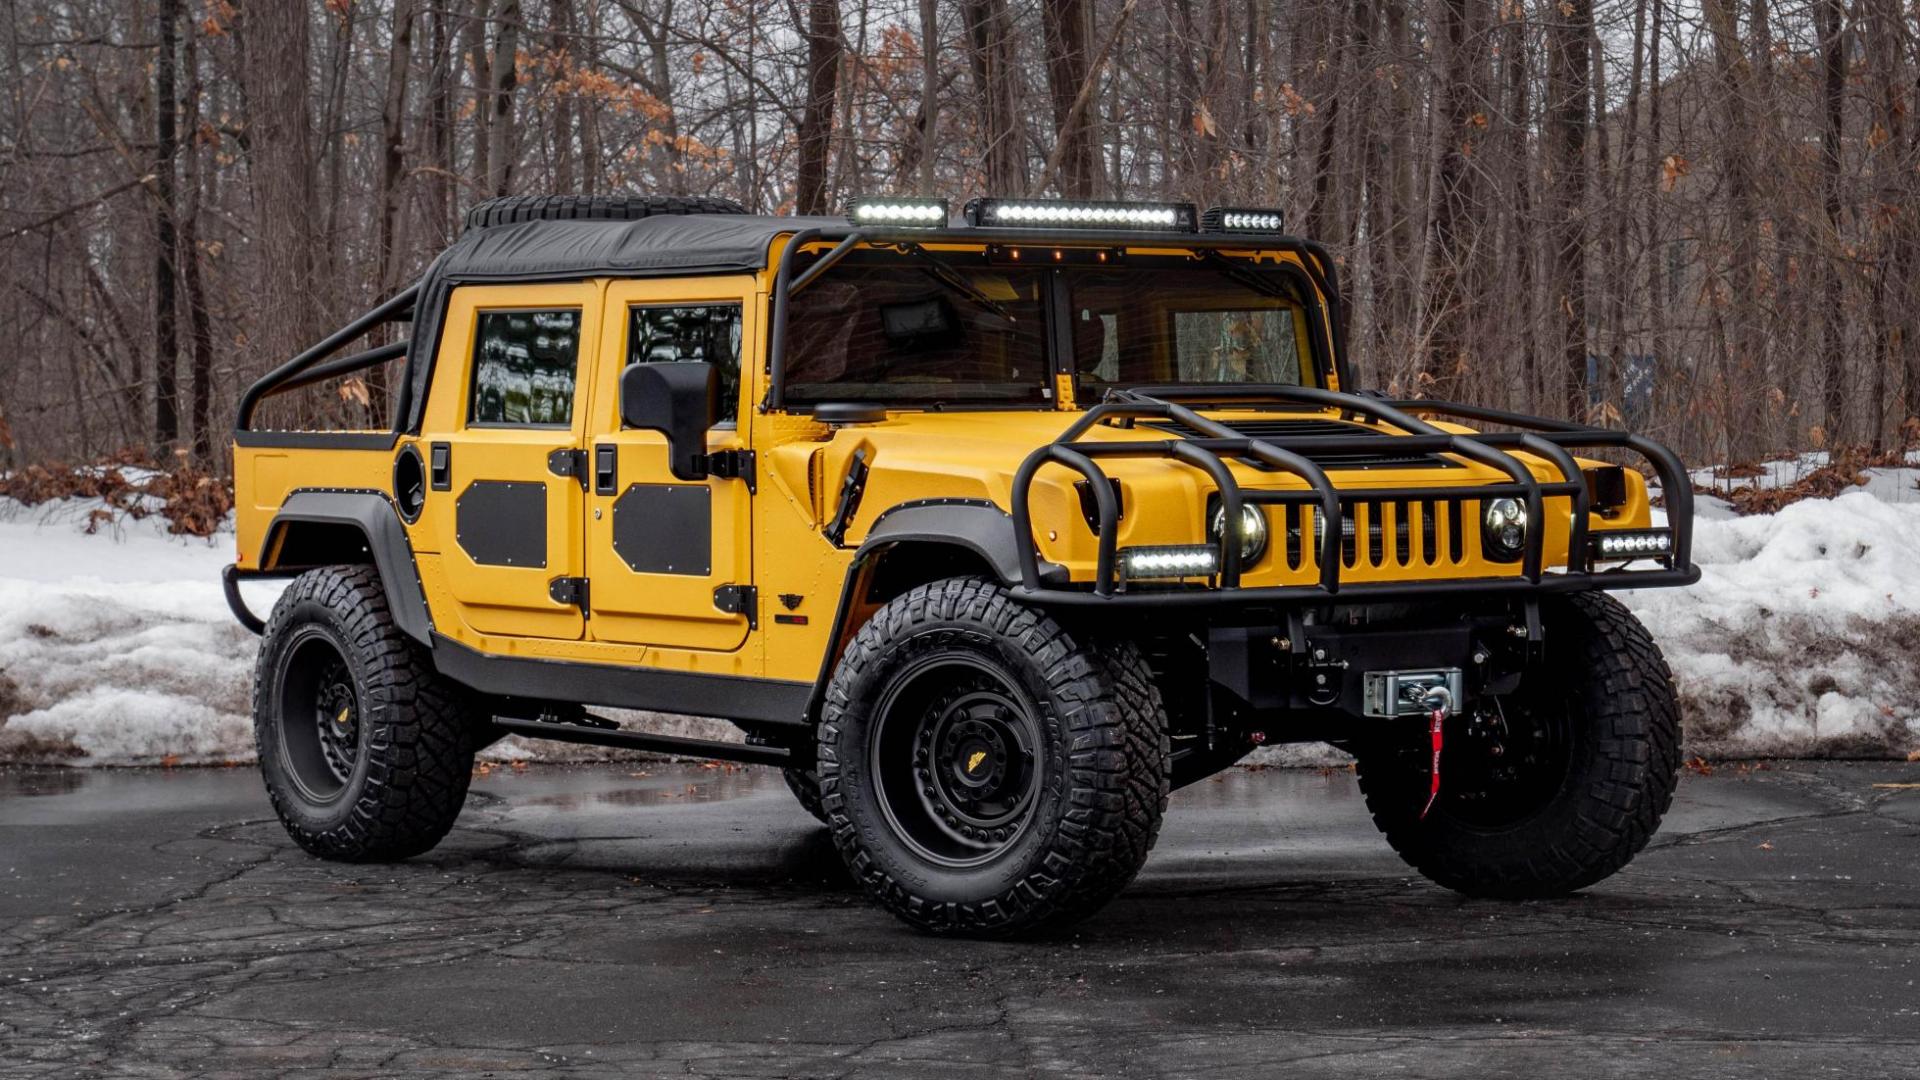 This is Mil-Spec Automotive’s $412,000 Hummer H1